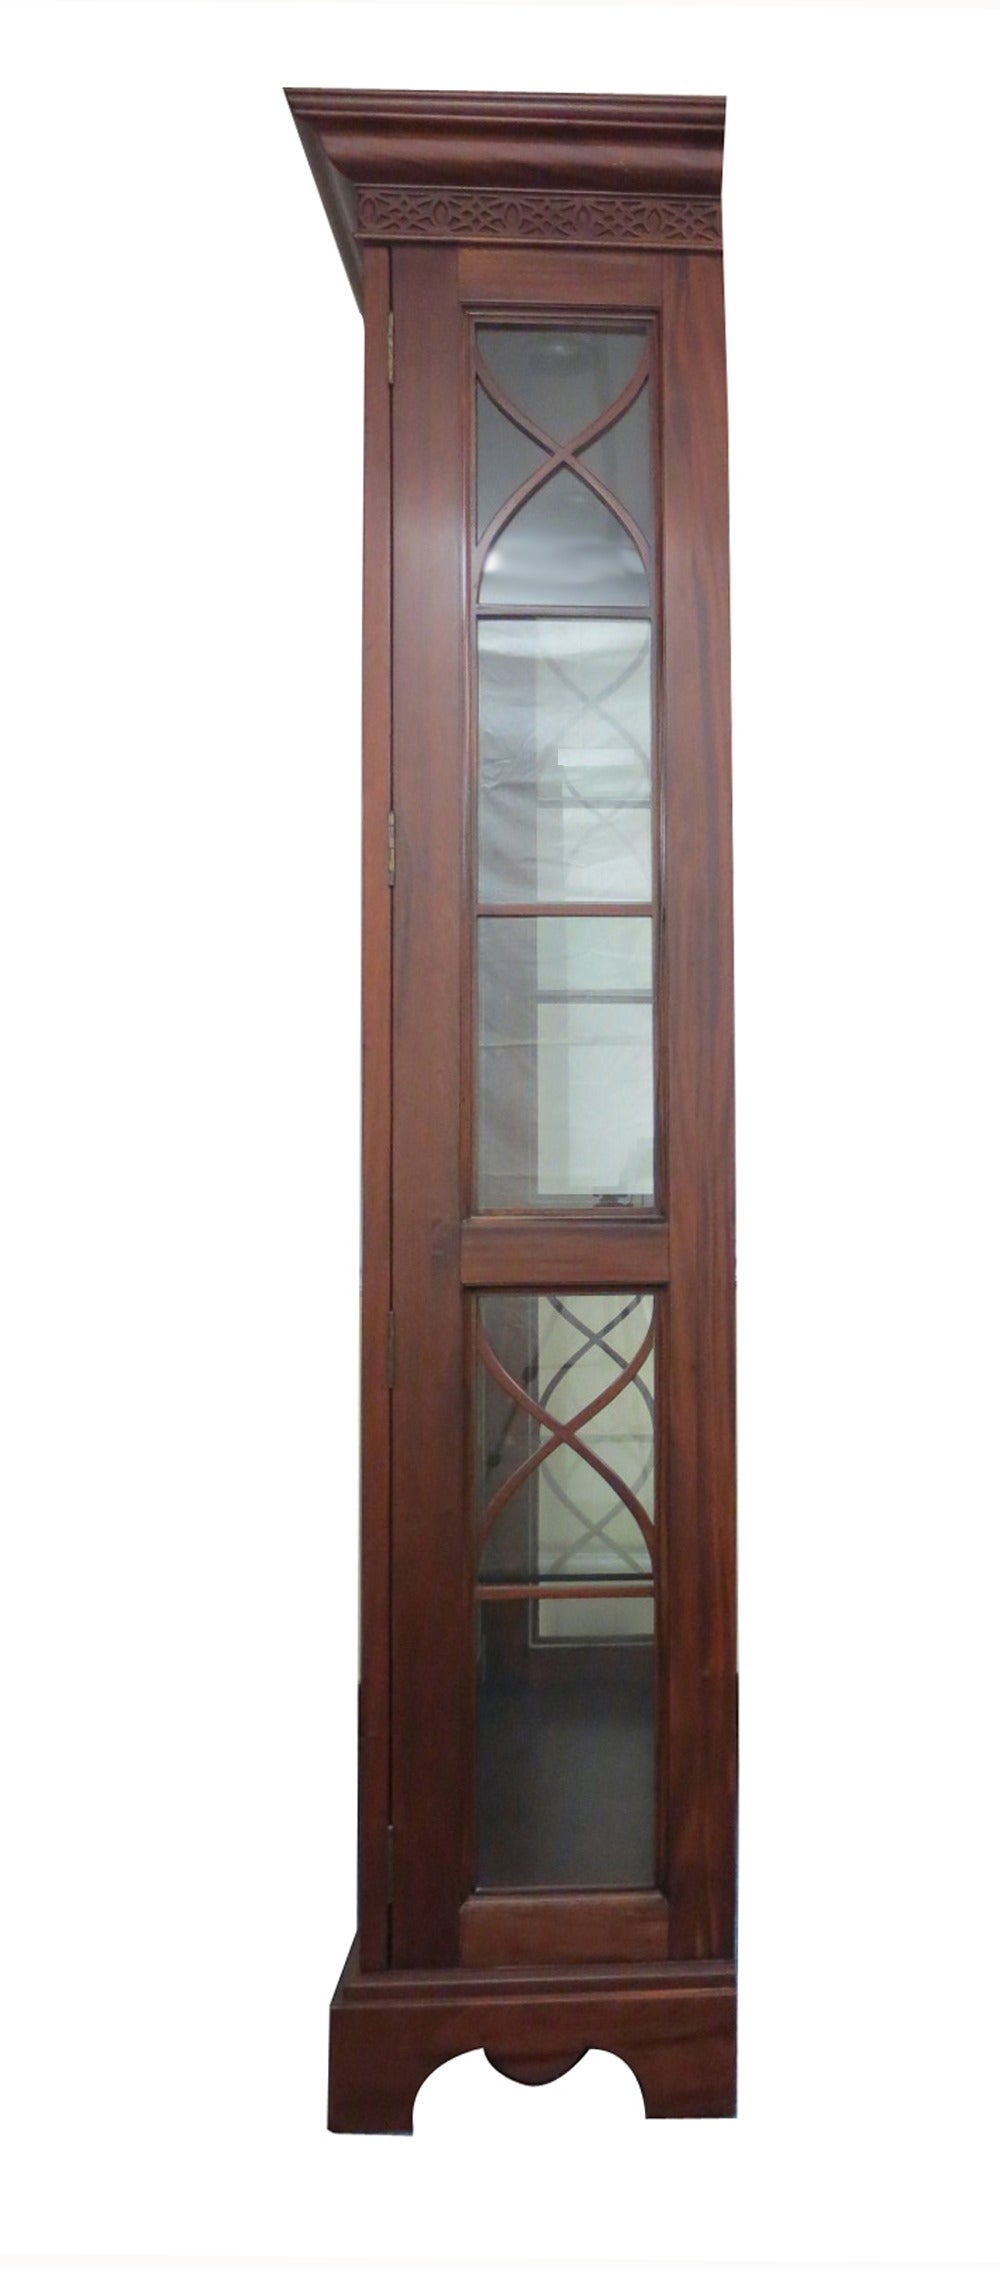 Large mahogany display cabinet with center mount acorn finial flanked by scroll acanthus brackets.   The interior consists of 4 glass shelves and the back is mirrored. The side panels are glazed and the glass is framed in rope trim.